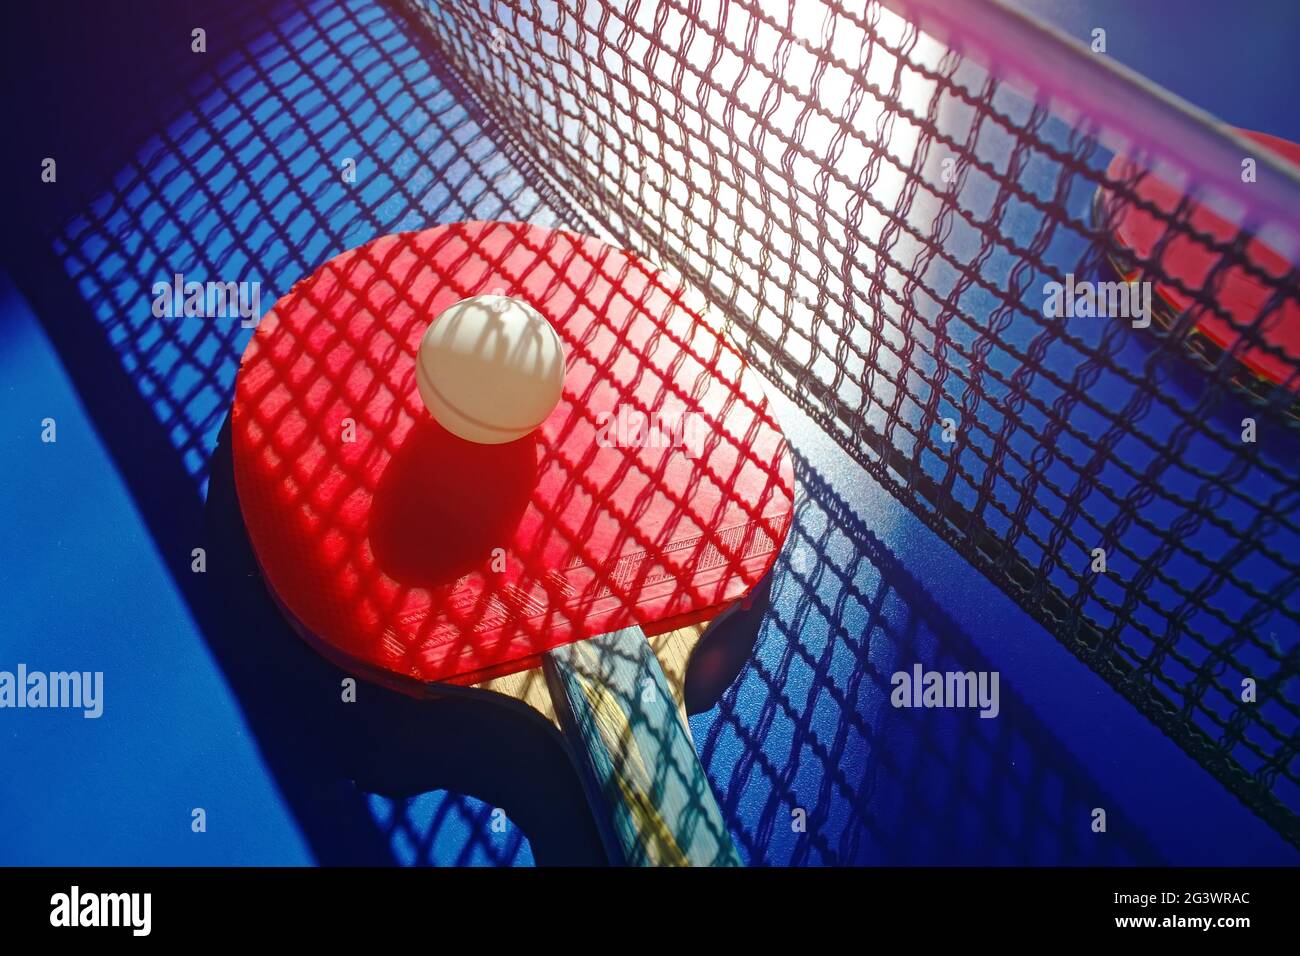 A red table tennis racket and a white ball lie on the surface of the table next to the net. Sports game Stock Photo